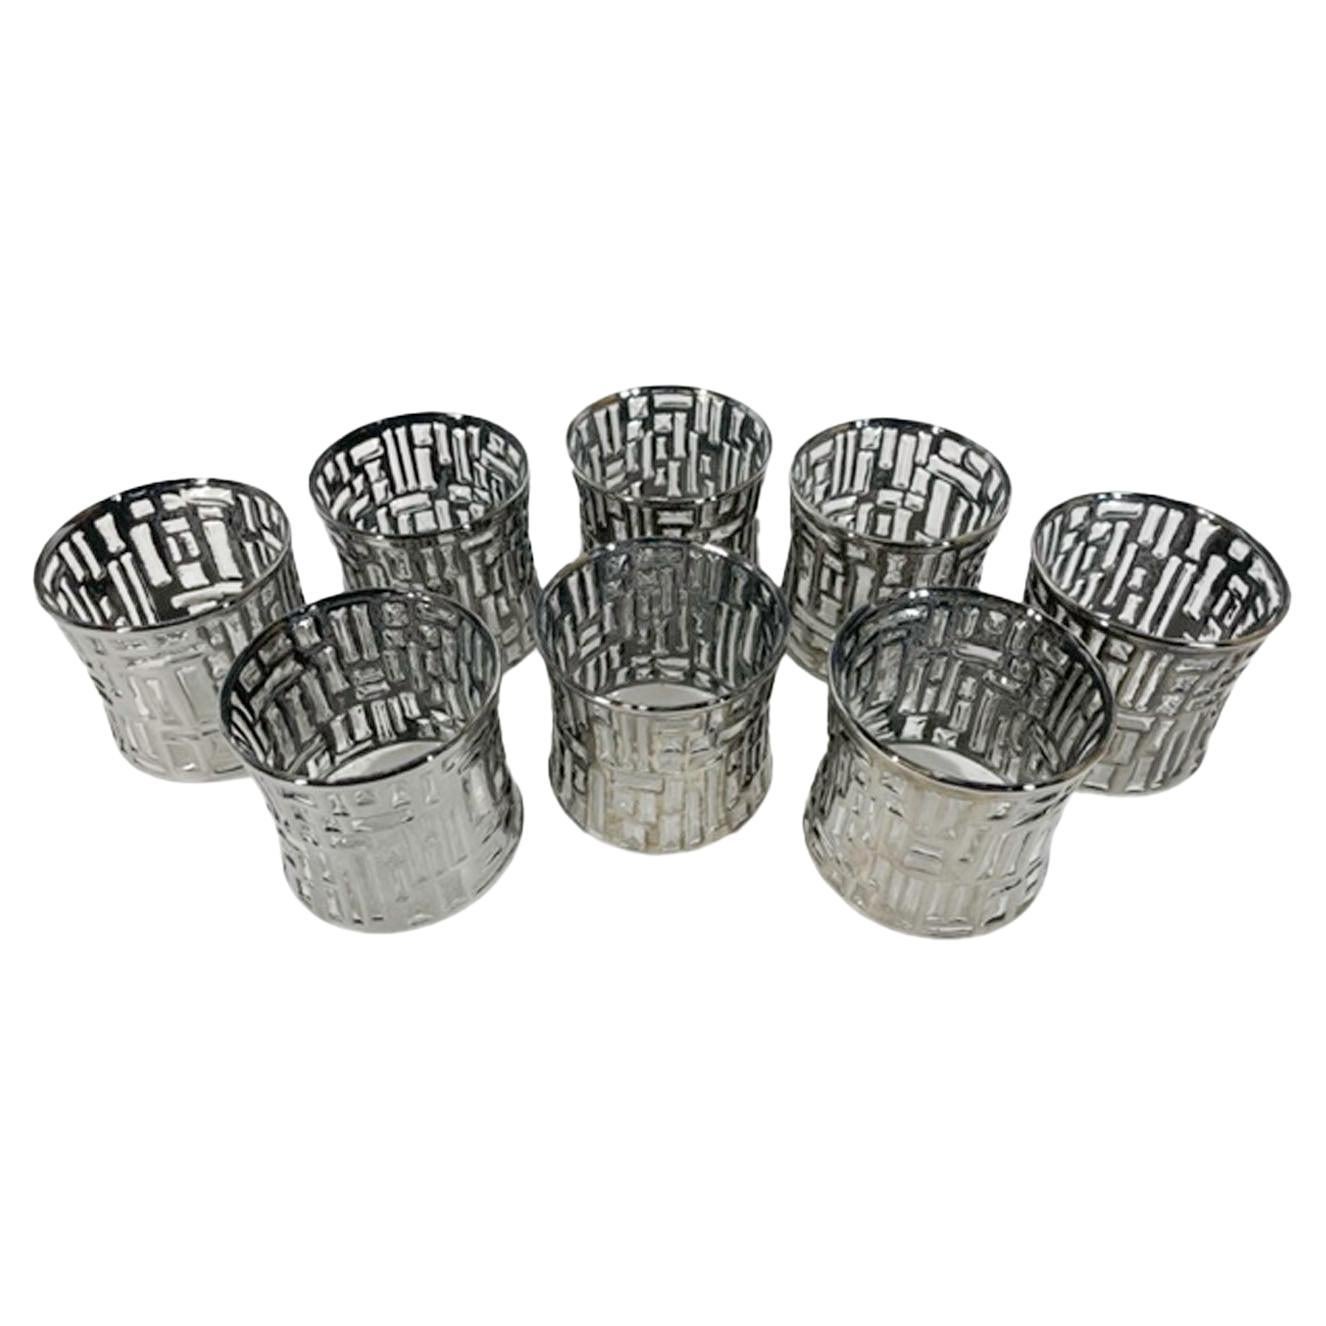 8 Vintage Rocks Glasses in the Silver Version of the Artica Pattern by Libbey